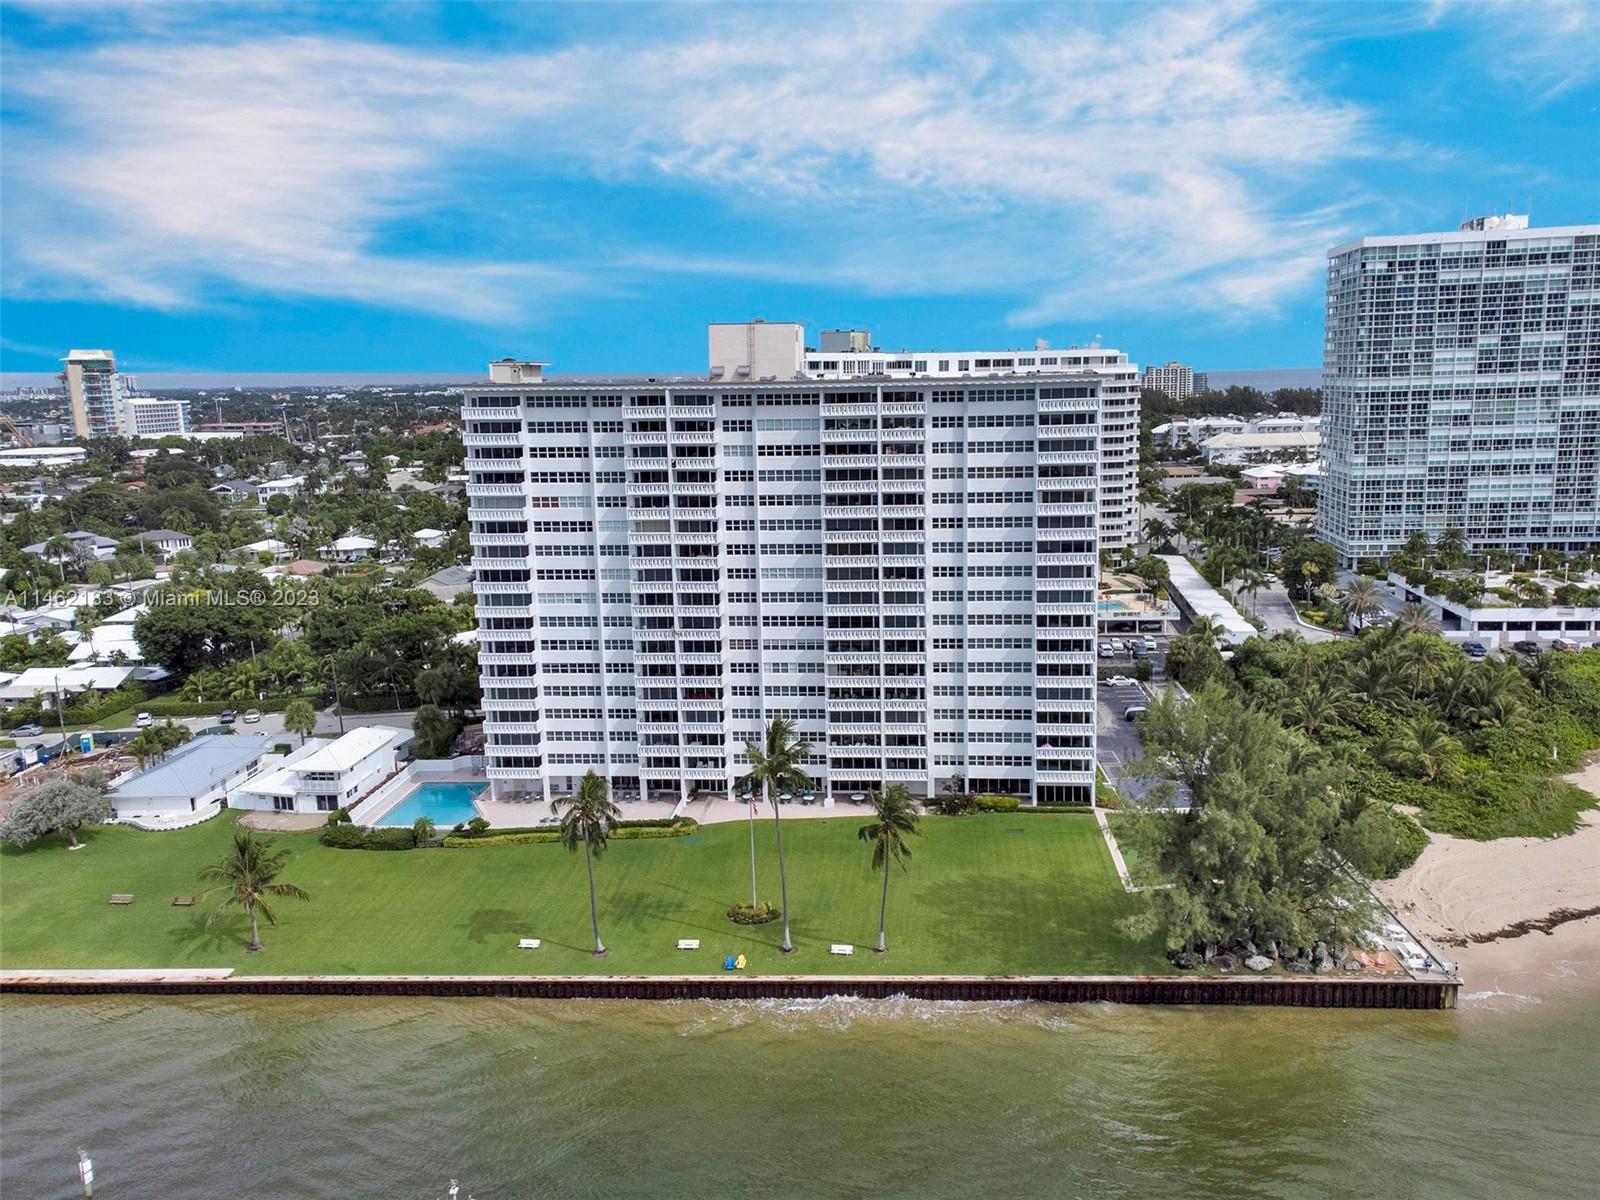 Spacious 1-bed, 1-bath unit in Sky Harbor East Condo, Ft. Lauderdale. Stunning partial ocean and cit